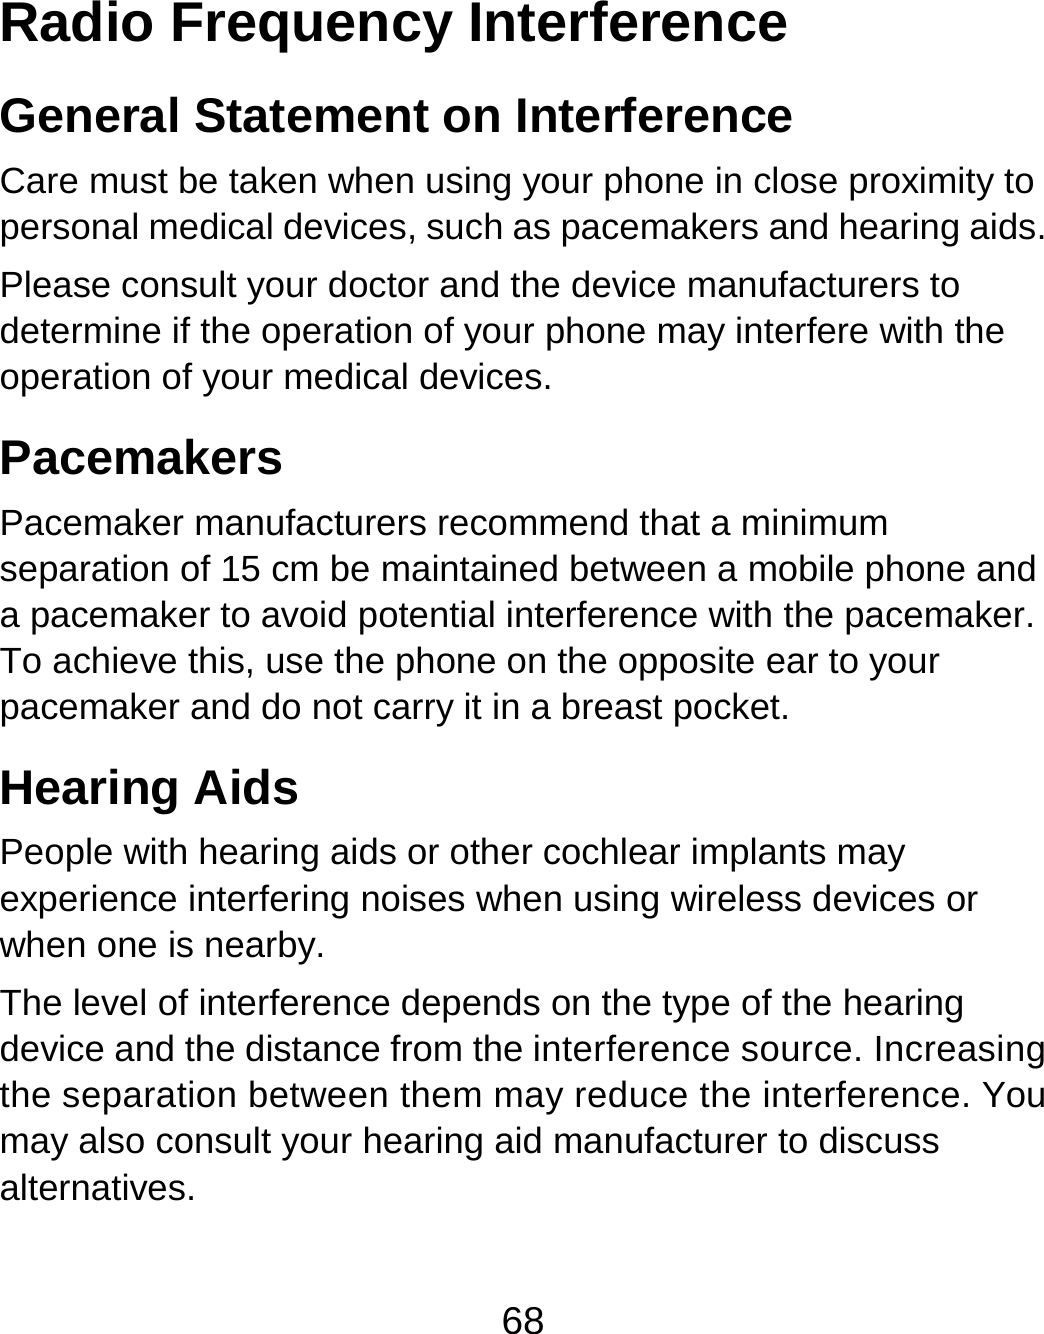 68 Radio Frequency Interference General Statement on Interference Care must be taken when using your phone in close proximity to personal medical devices, such as pacemakers and hearing aids. Please consult your doctor and the device manufacturers to determine if the operation of your phone may interfere with the operation of your medical devices. Pacemakers Pacemaker manufacturers recommend that a minimum separation of 15 cm be maintained between a mobile phone and a pacemaker to avoid potential interference with the pacemaker. To achieve this, use the phone on the opposite ear to your pacemaker and do not carry it in a breast pocket. Hearing Aids People with hearing aids or other cochlear implants may experience interfering noises when using wireless devices or when one is nearby. The level of interference depends on the type of the hearing device and the distance from the interference source. Increasing the separation between them may reduce the interference. You may also consult your hearing aid manufacturer to discuss alternatives. 